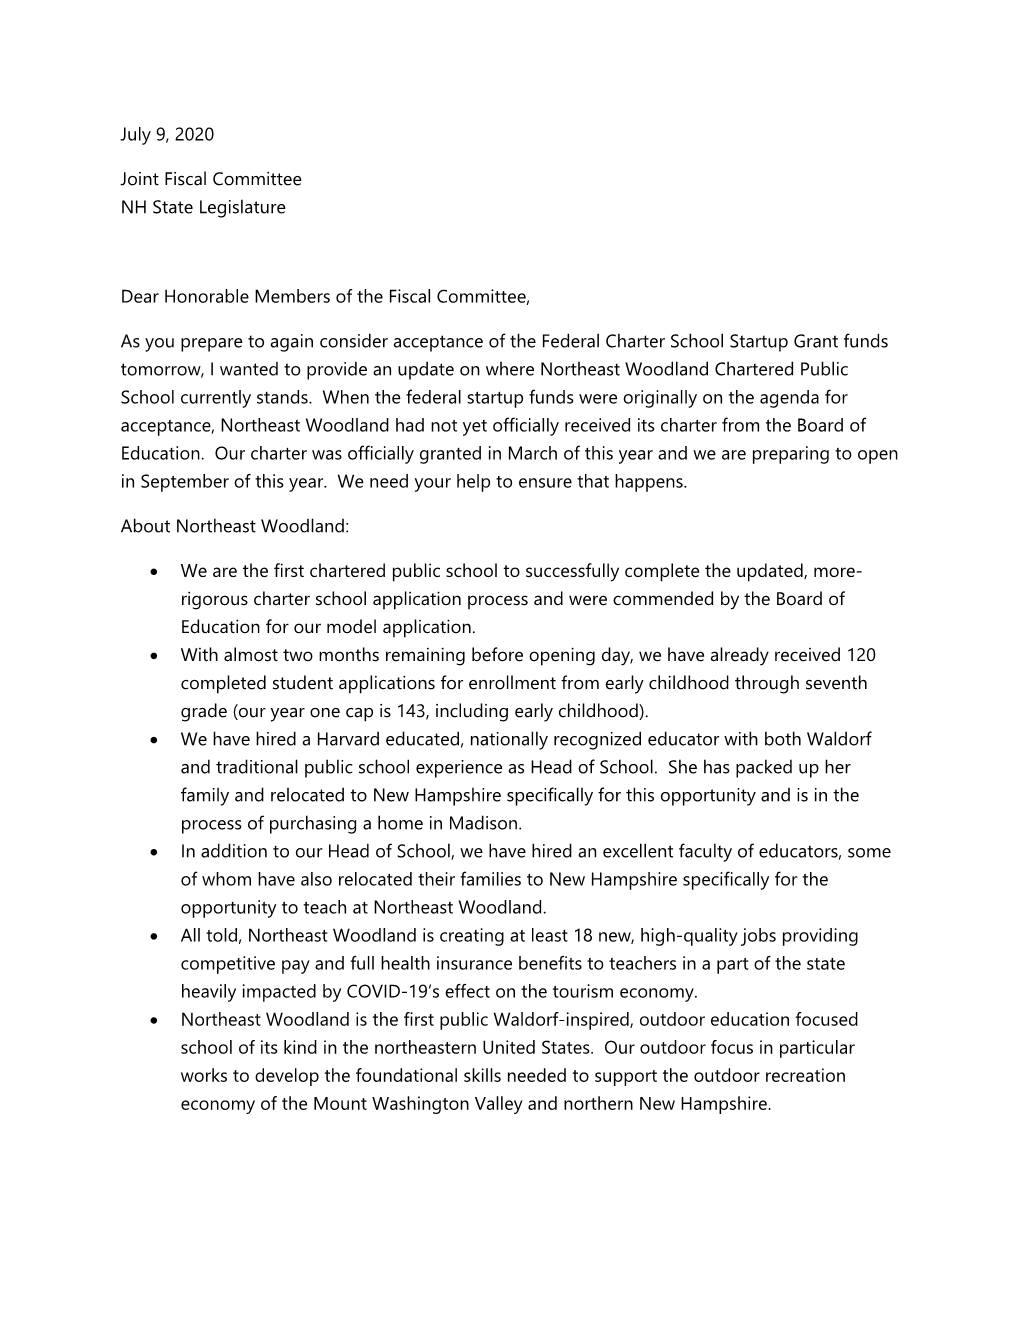 Northeastwoodland-Letter-To-Fiscal.Pdf